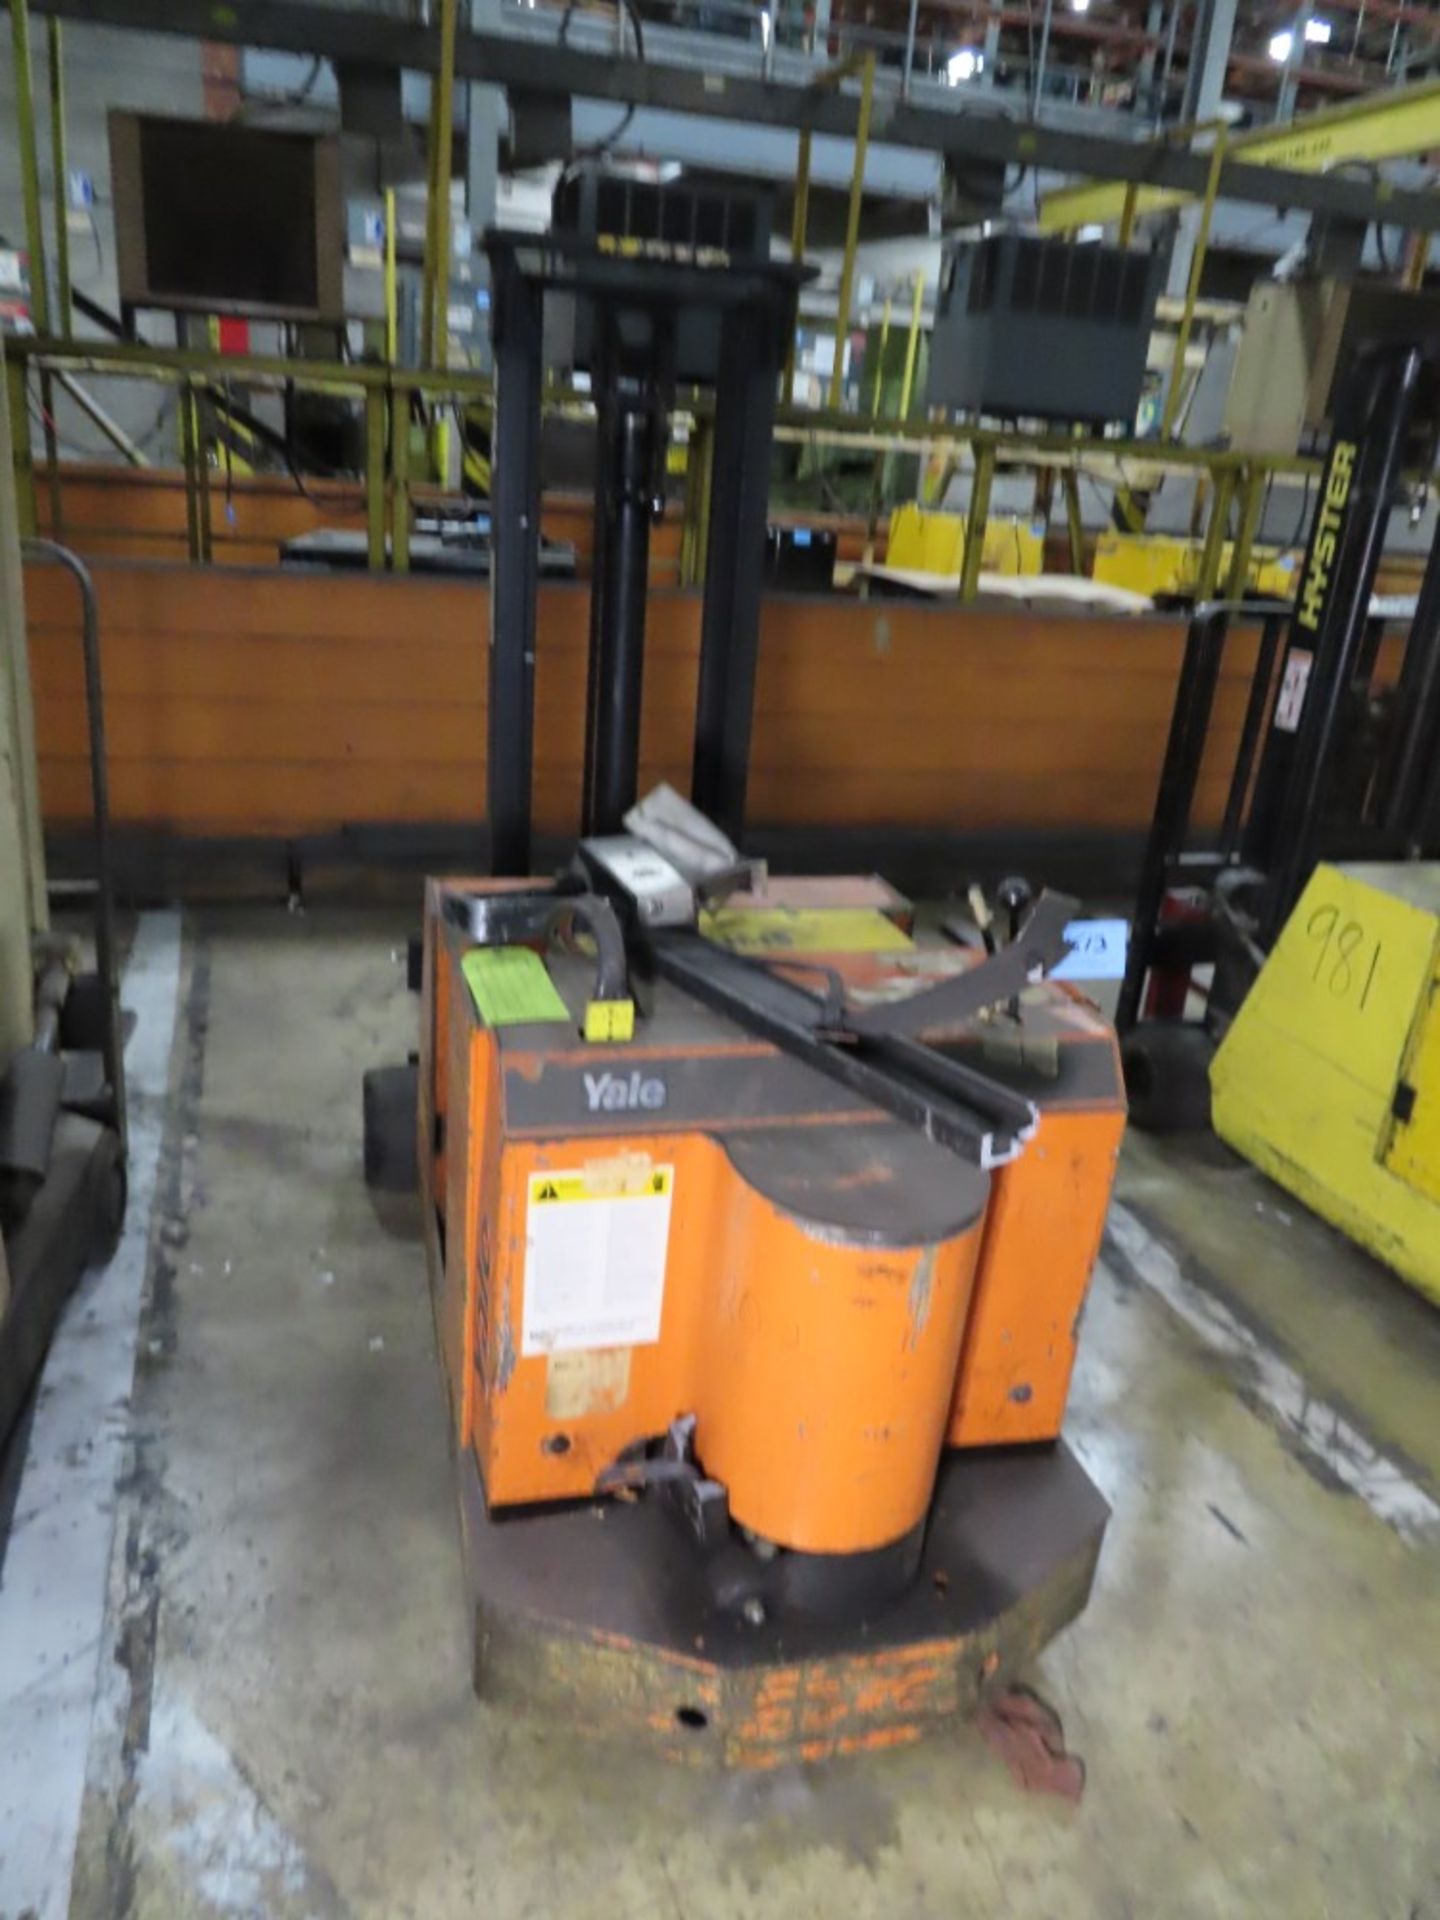 YALE 3,000LB. CAPACITY ELECTRIC LIFT TRUCK (AS IS)